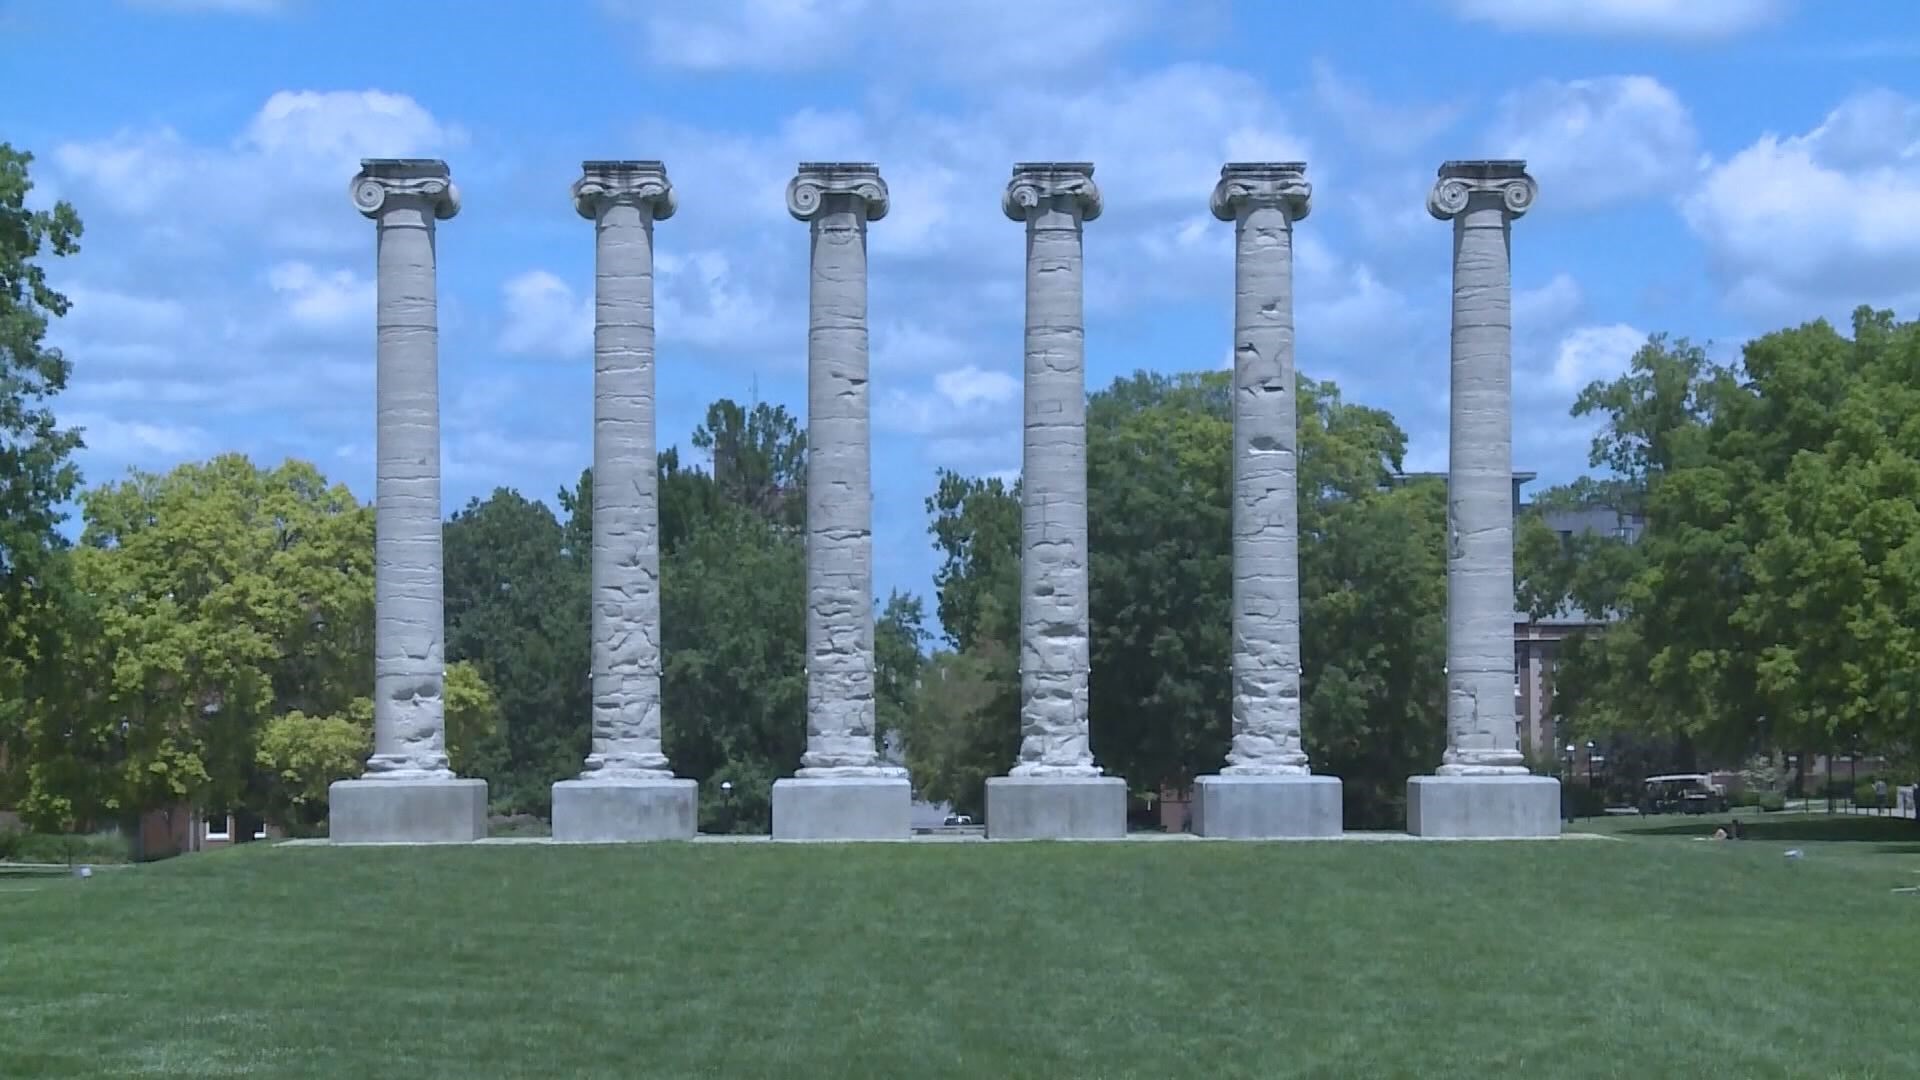 One suspicious case at the University of Missouri is for $5,000, the school confirmed.